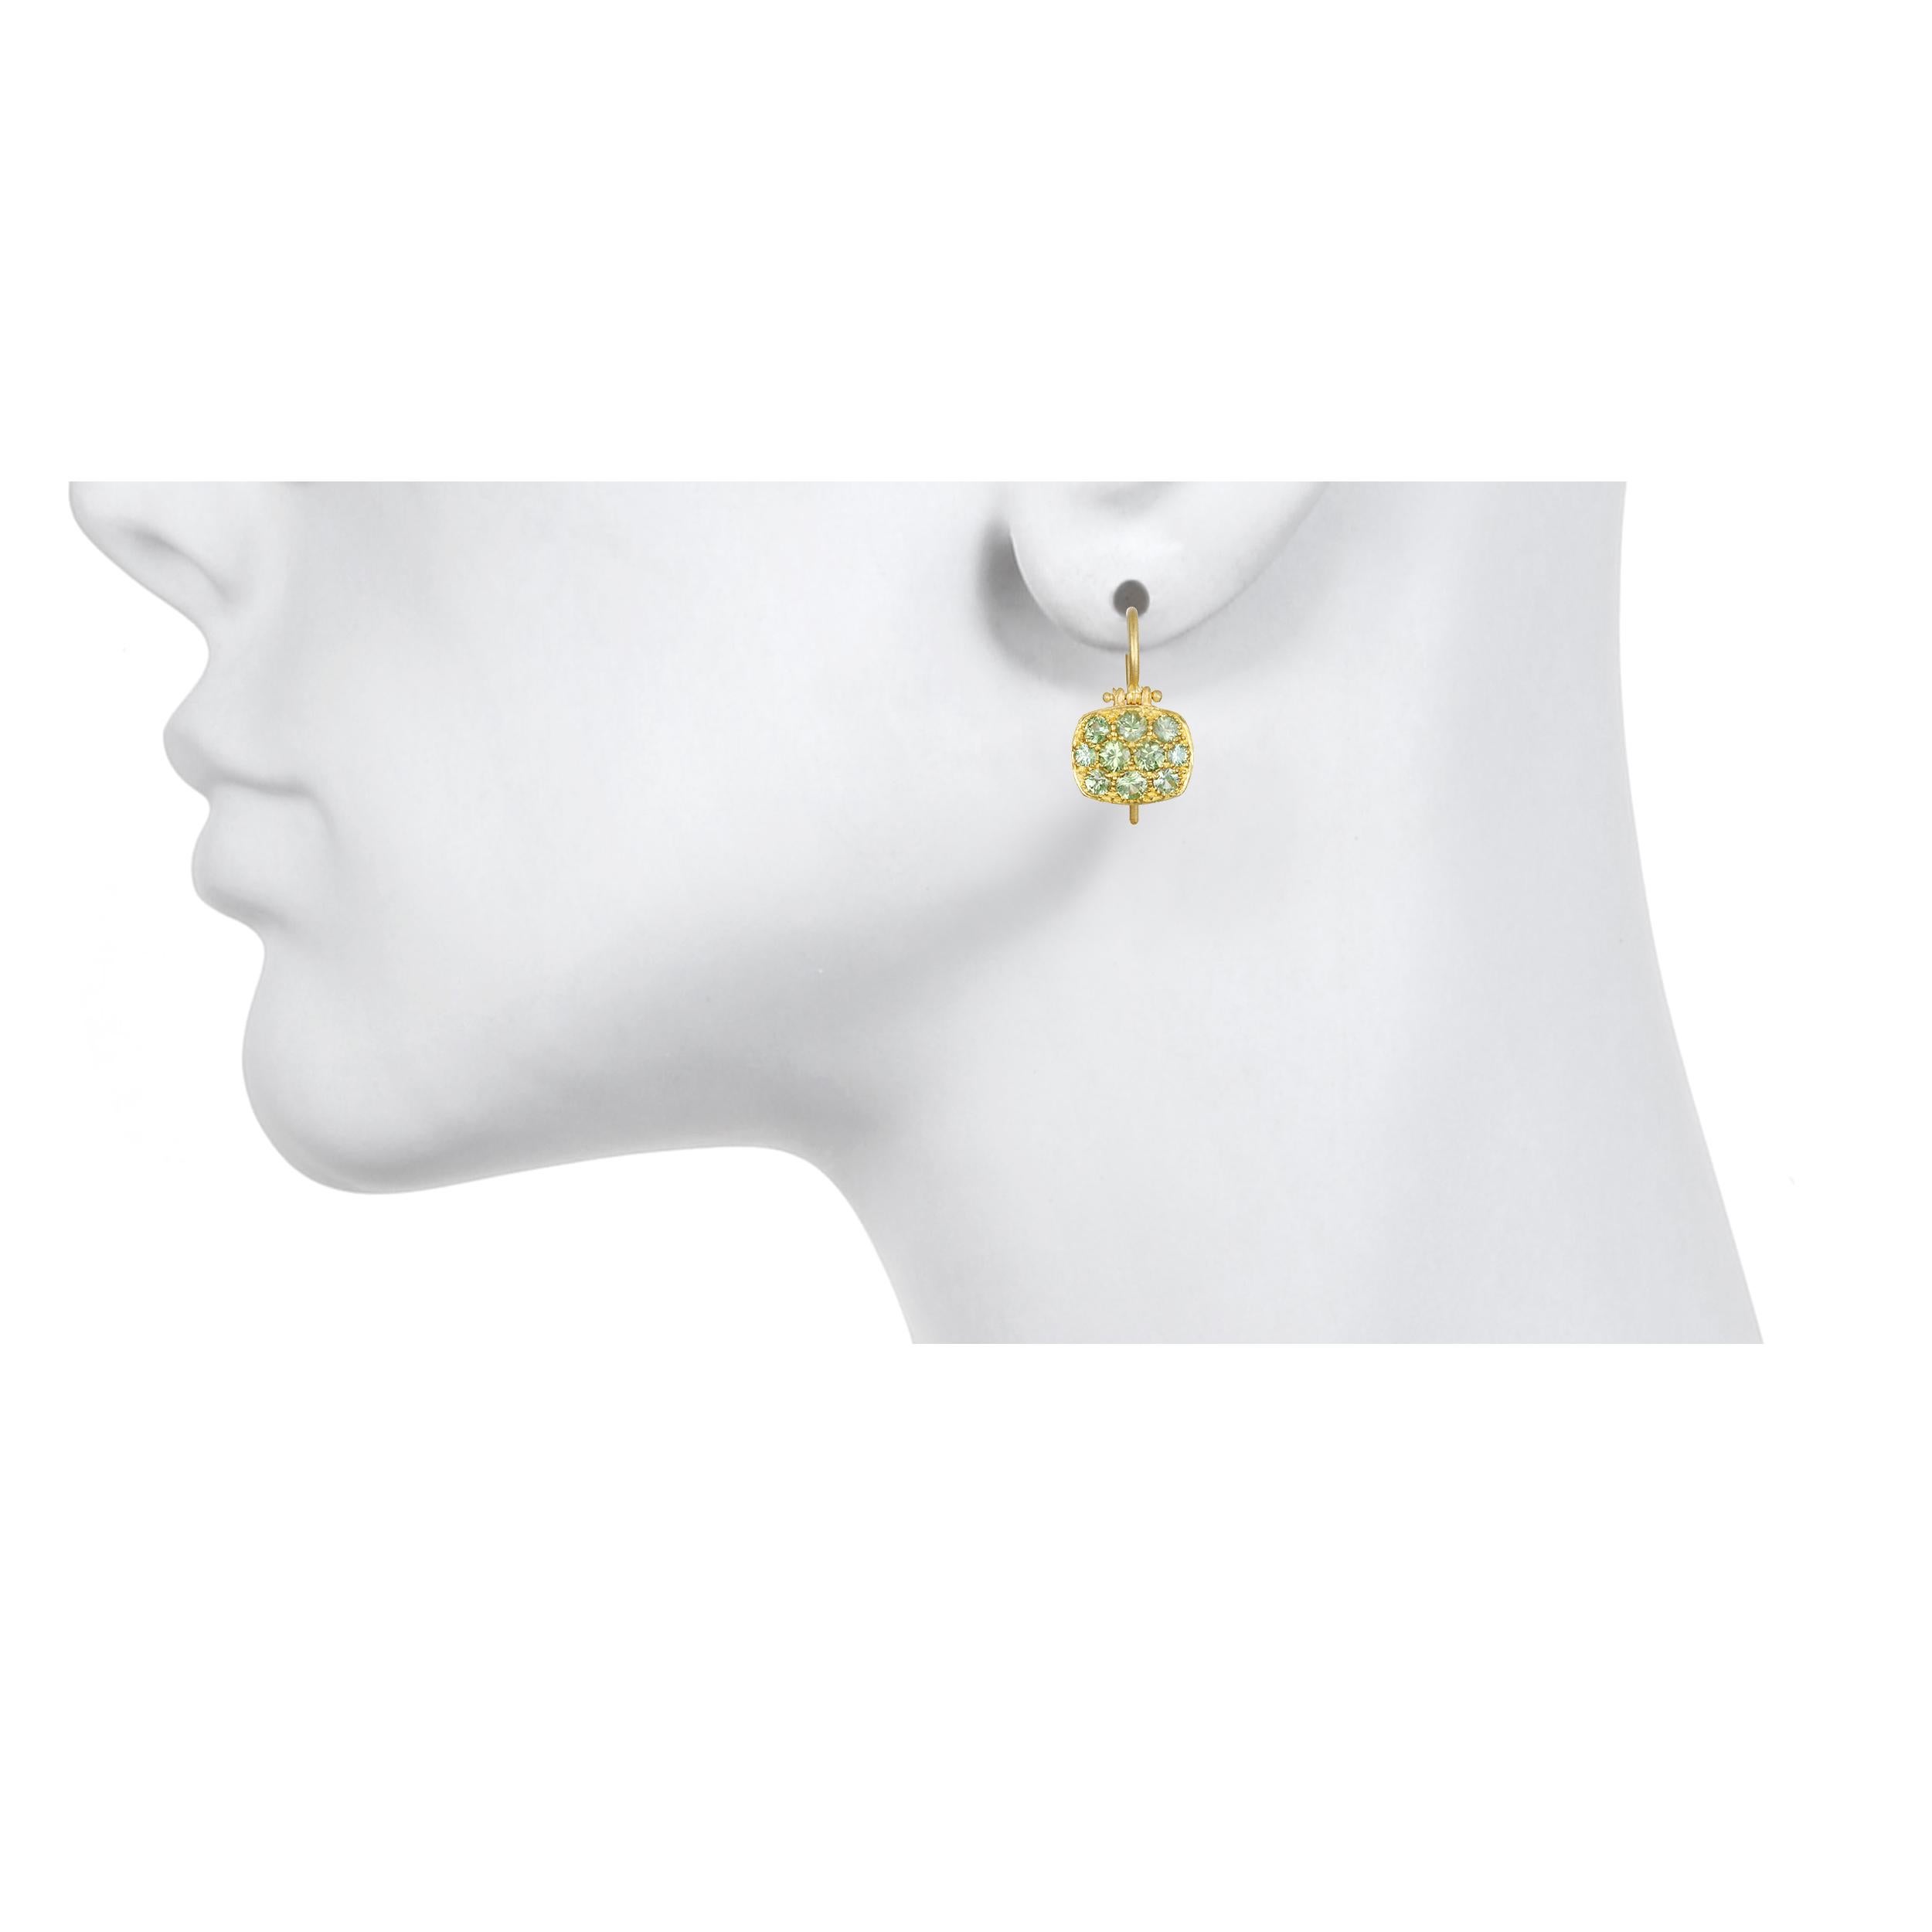 Faye Kim 18 Karat Green Sapphire Chiclet Earrings

These bright and effervescent green sapphire chiclet earrings have just enough sparkle to get noticed but with understated elegance.  Hinged for movement, uniquely shaped and light-weight make these